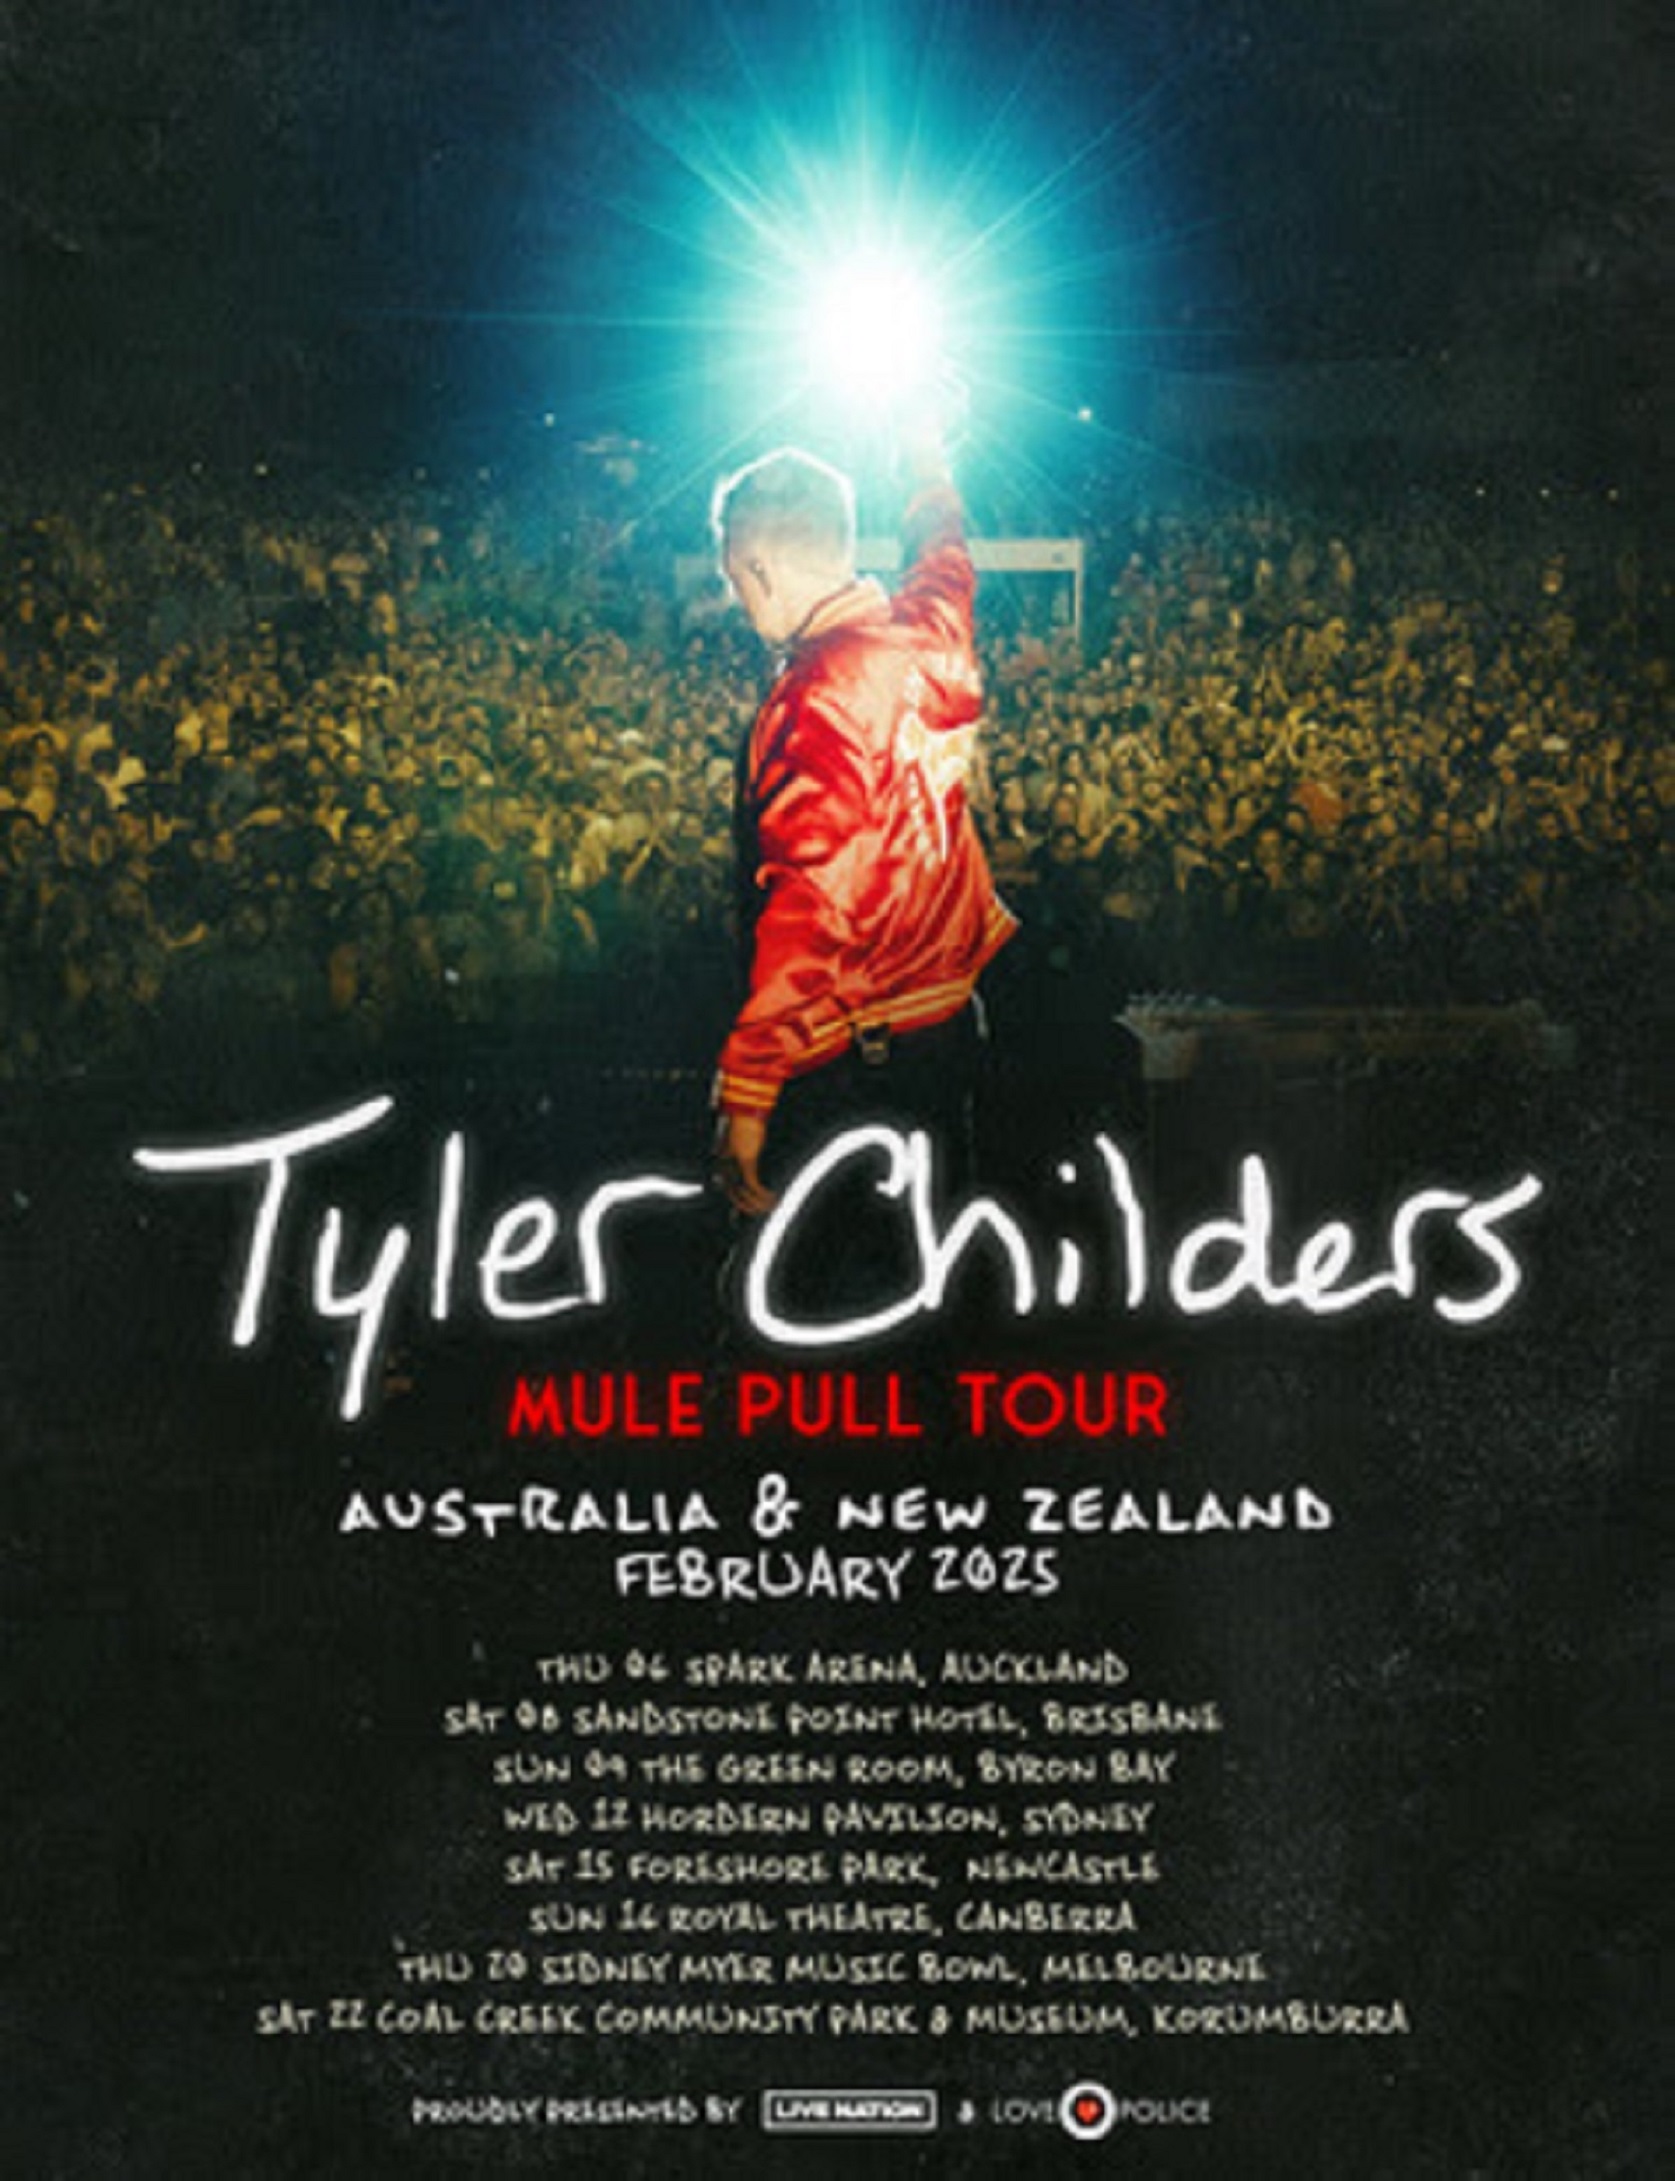 Tyler Childers confirms 2025 headline tour in Australia and New Zealand